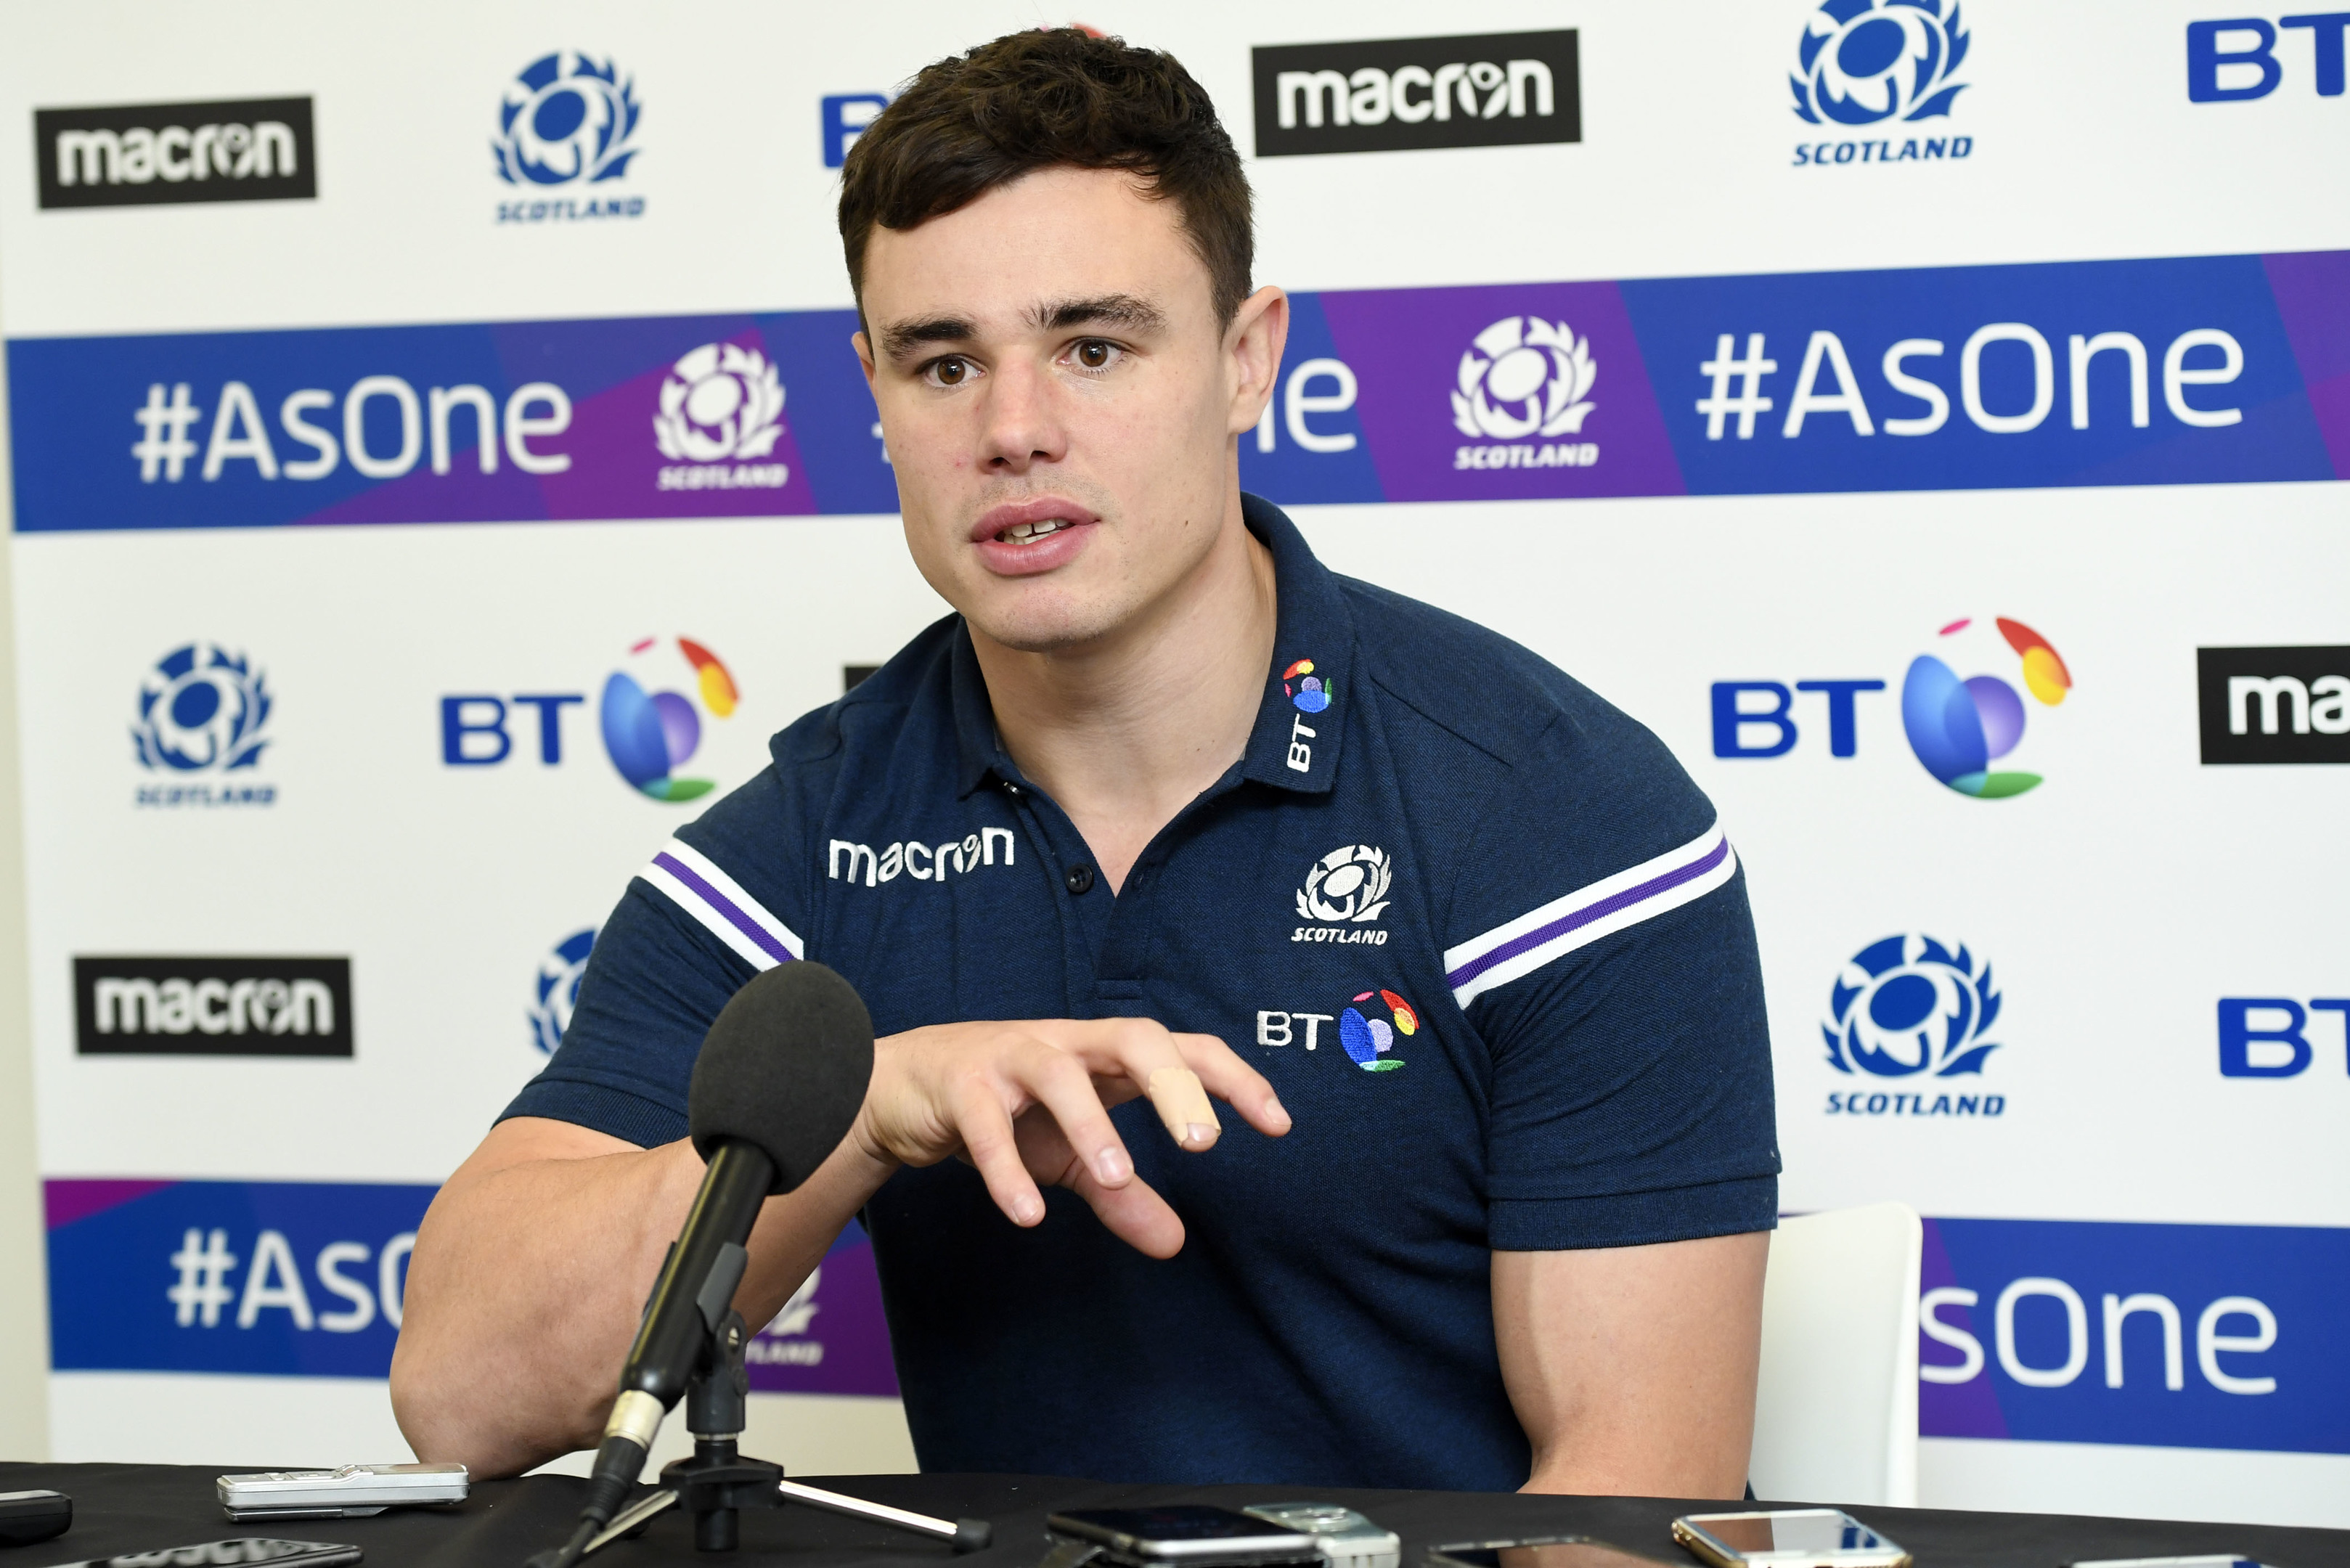 Lee Jones has returned to the Scotland team after a five year gap.